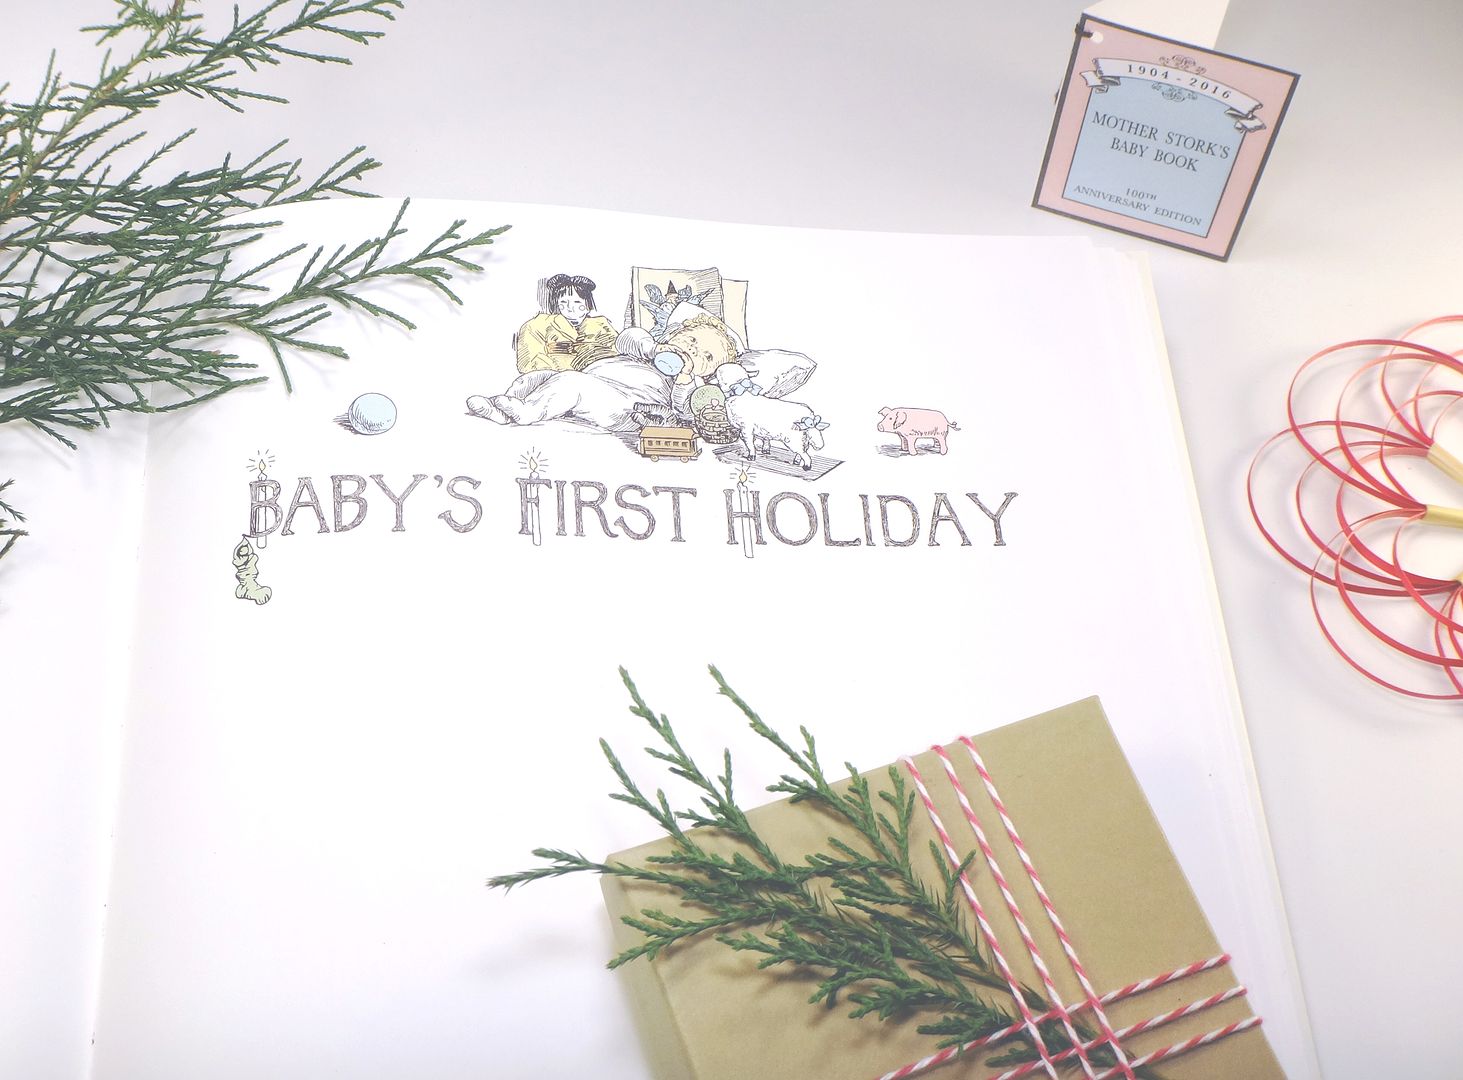 Mother Stork's Keepsake Baby Book at Kistner Supply Co : Cool first Christmas gifts for baby | Cool Mom Picks Holiday Gift Guide 2016